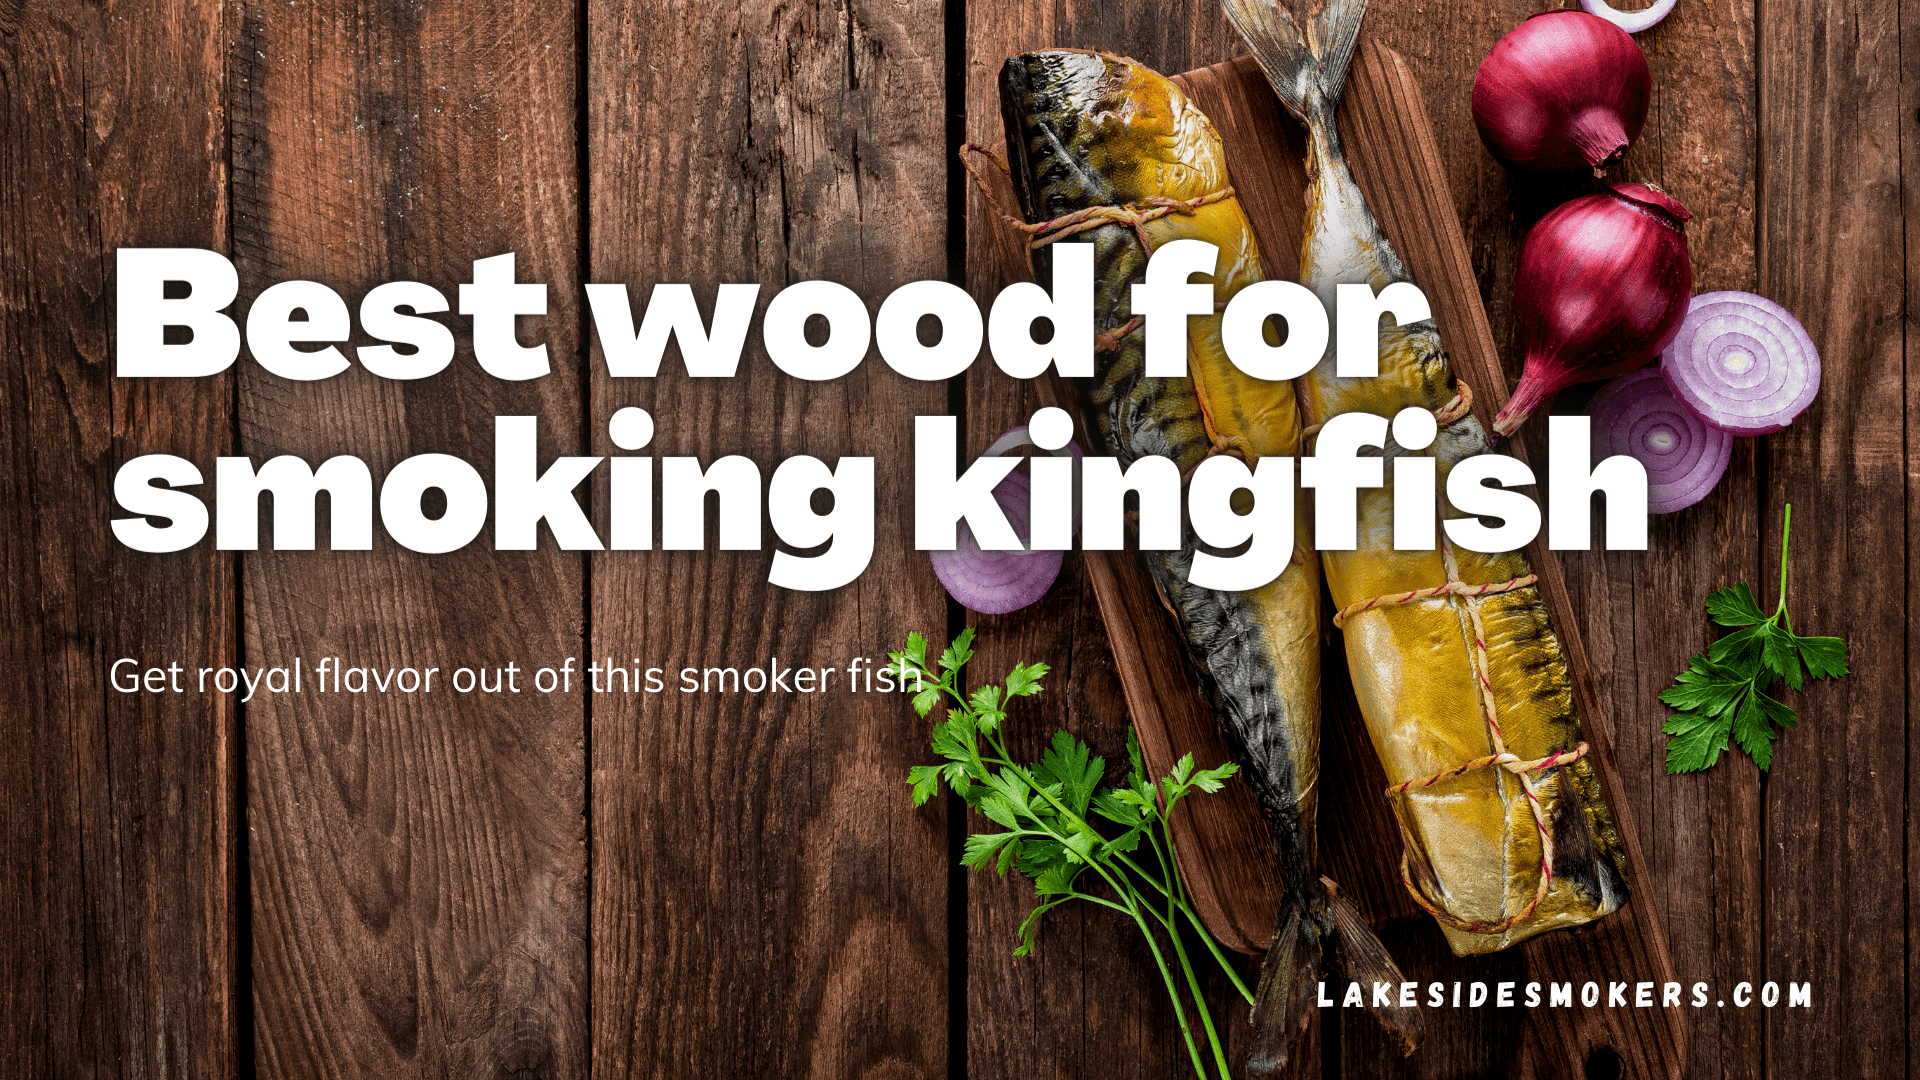 Best wood for smoking kingfish | Get royal flavor out of this smoker fish